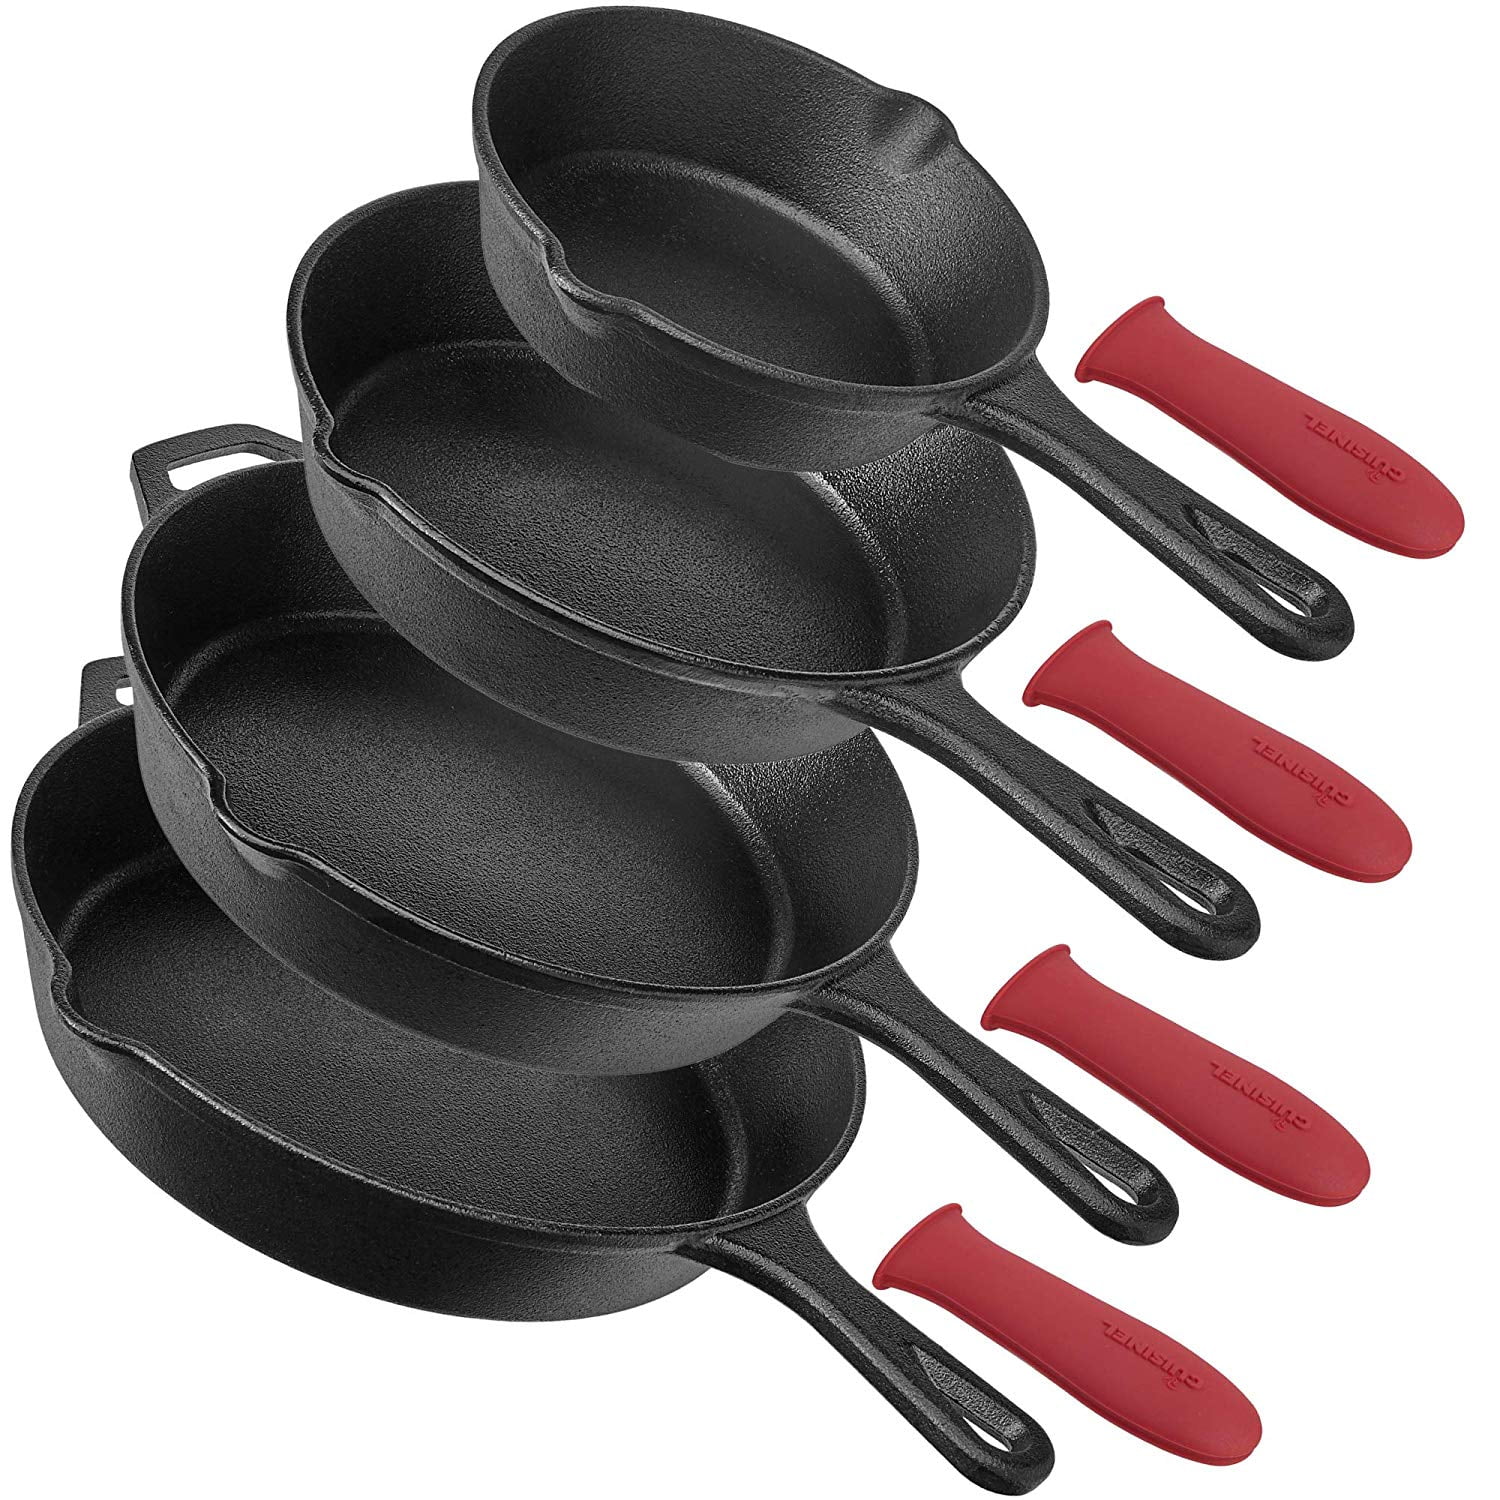 Choice 3-Piece Pre-Seasoned Cast Iron Skillet Set - Includes 8, 10 1/4,  and 12 Skillets